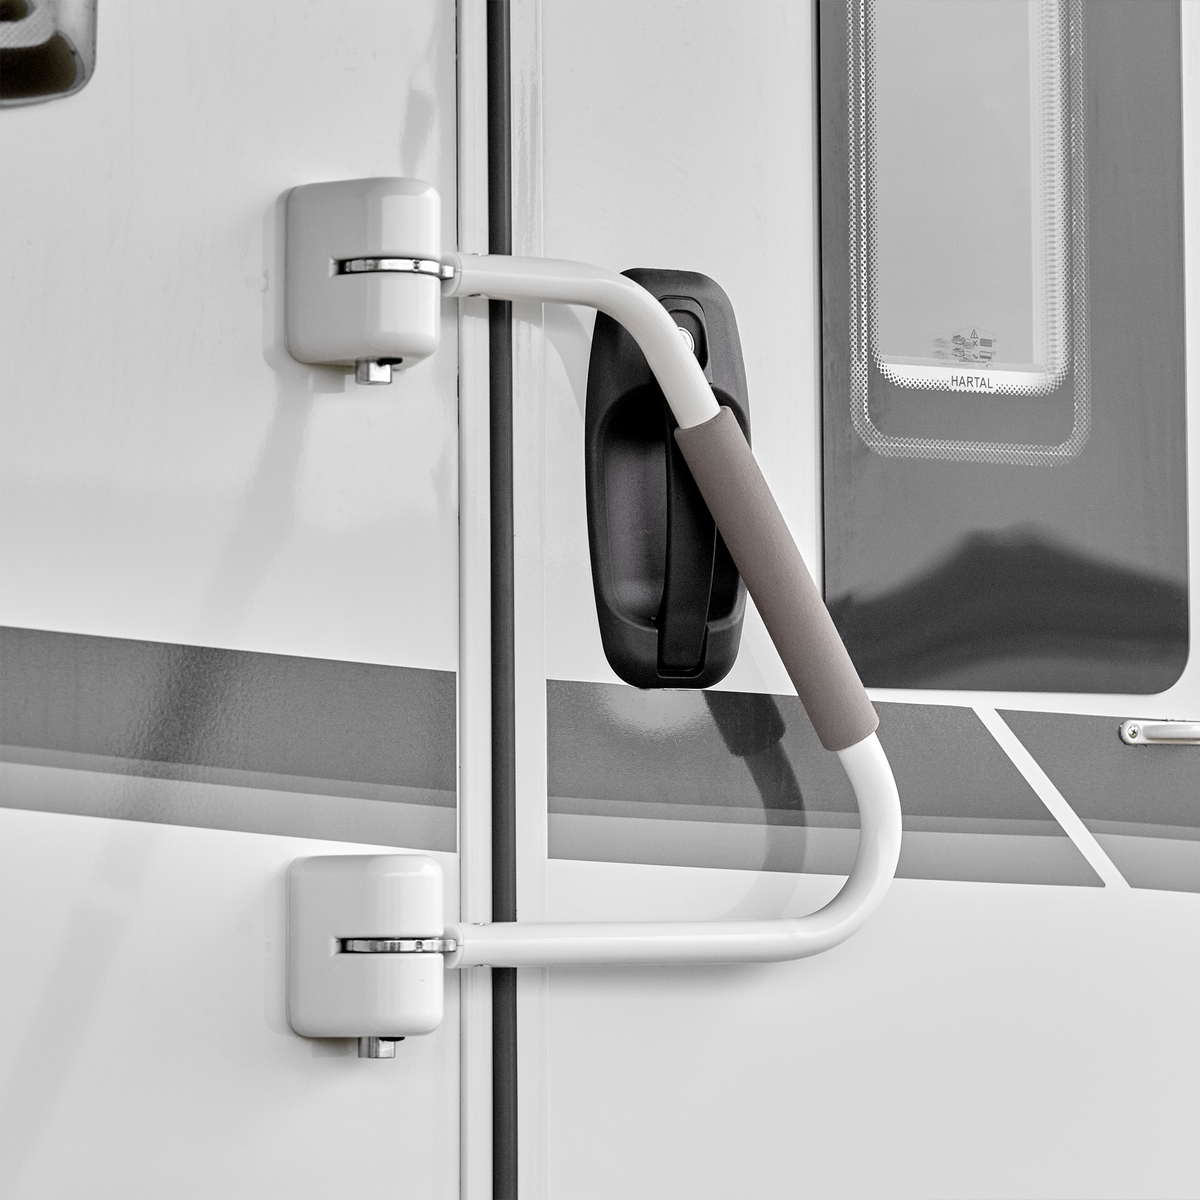 A picture of the Thule Security Handrail attached to the door of a motorhome.